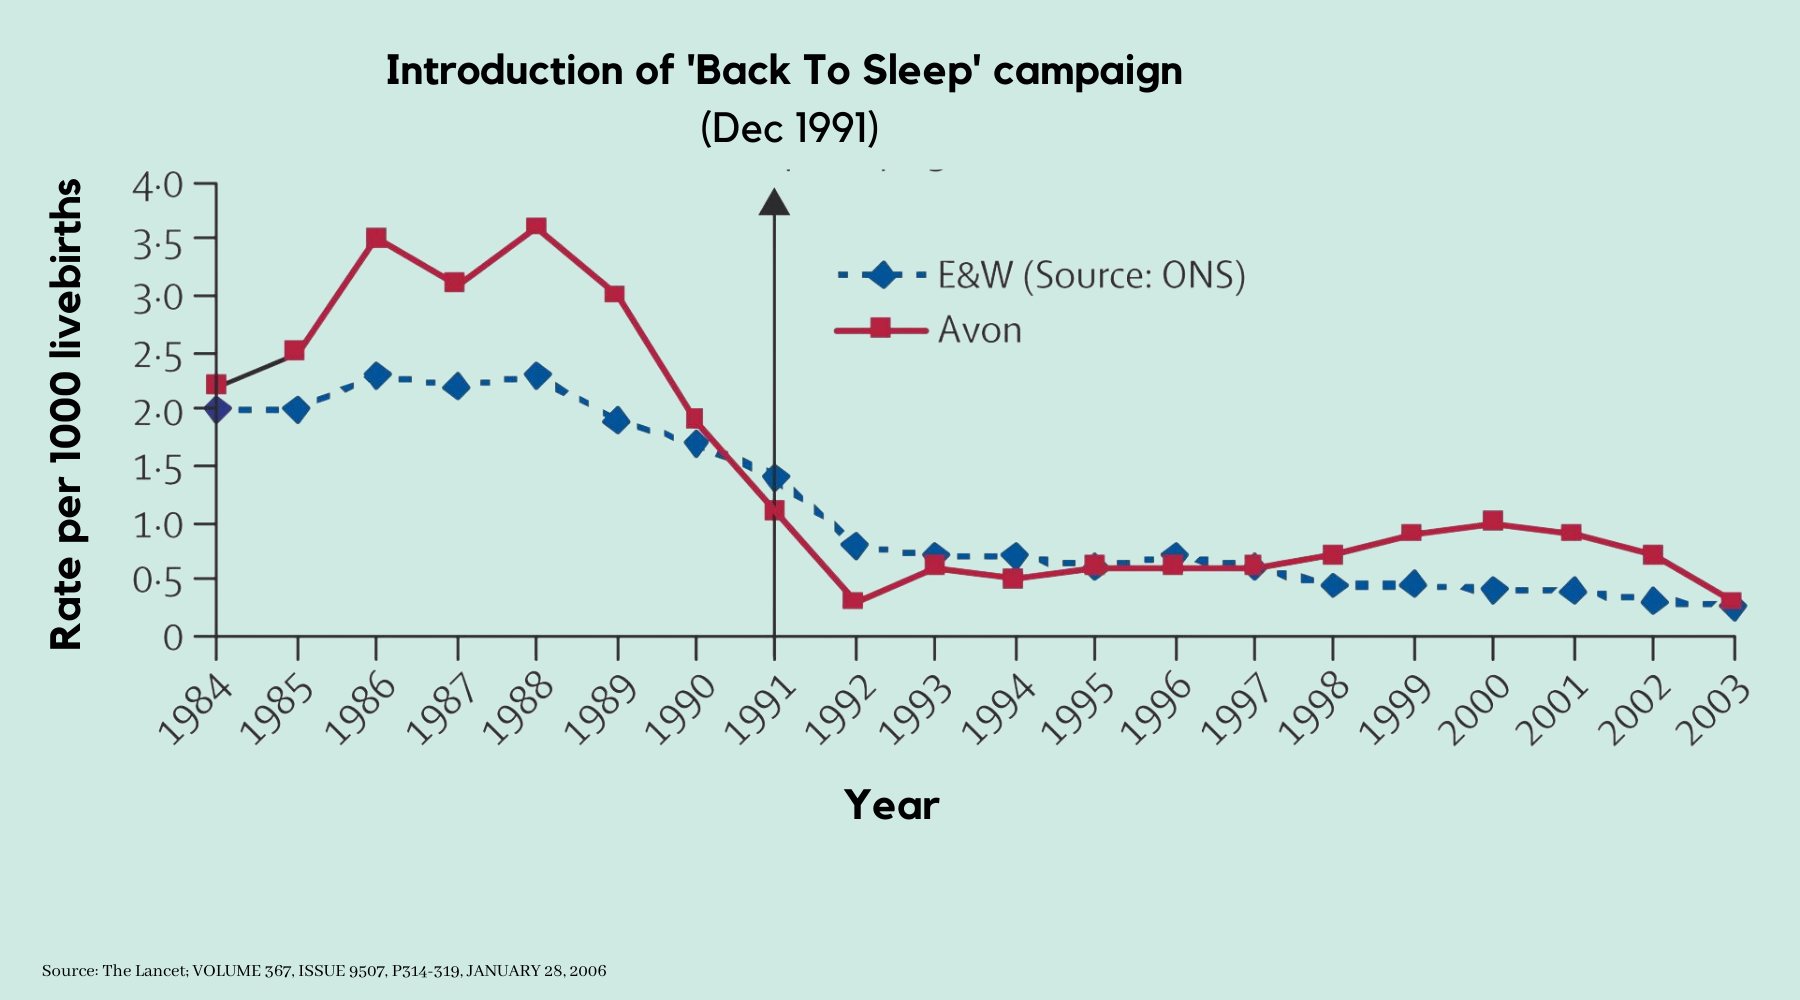 Decline in SIDS in the UK after the introduction of Back to Sleep campaign in 1991